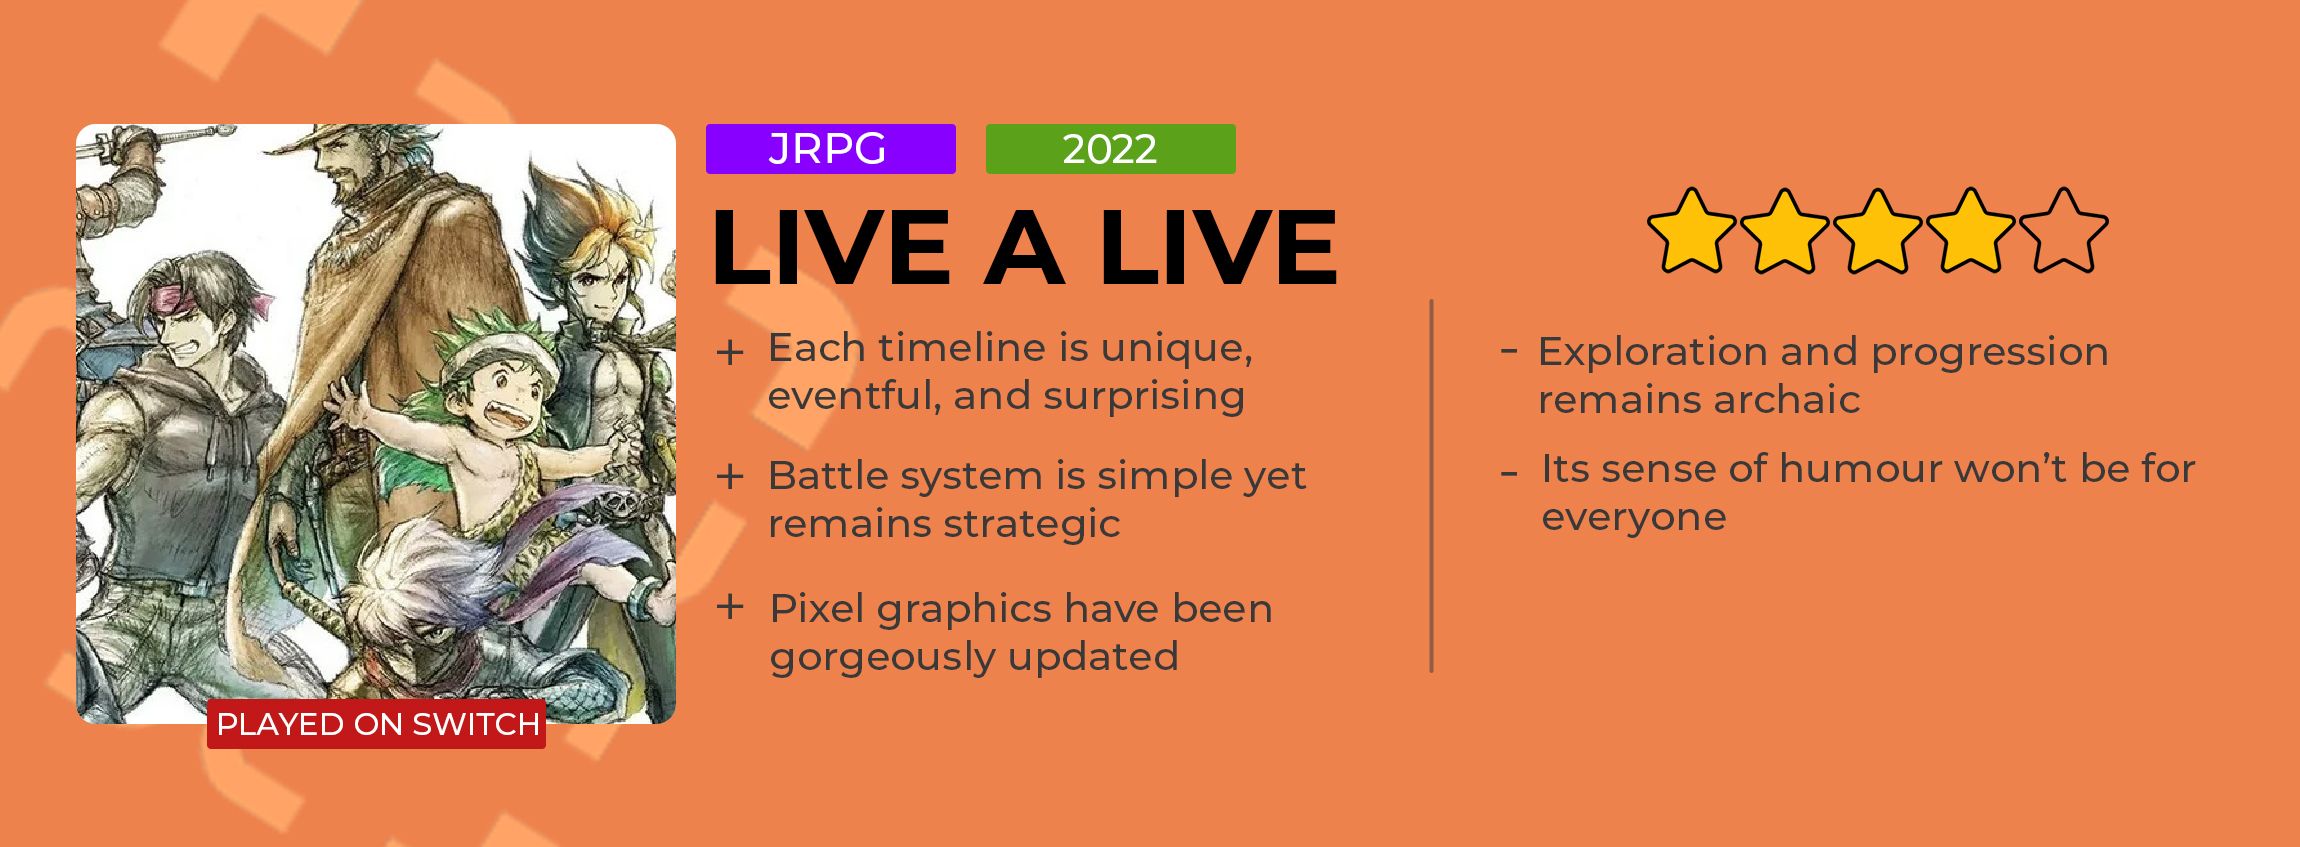 Live a Live review card